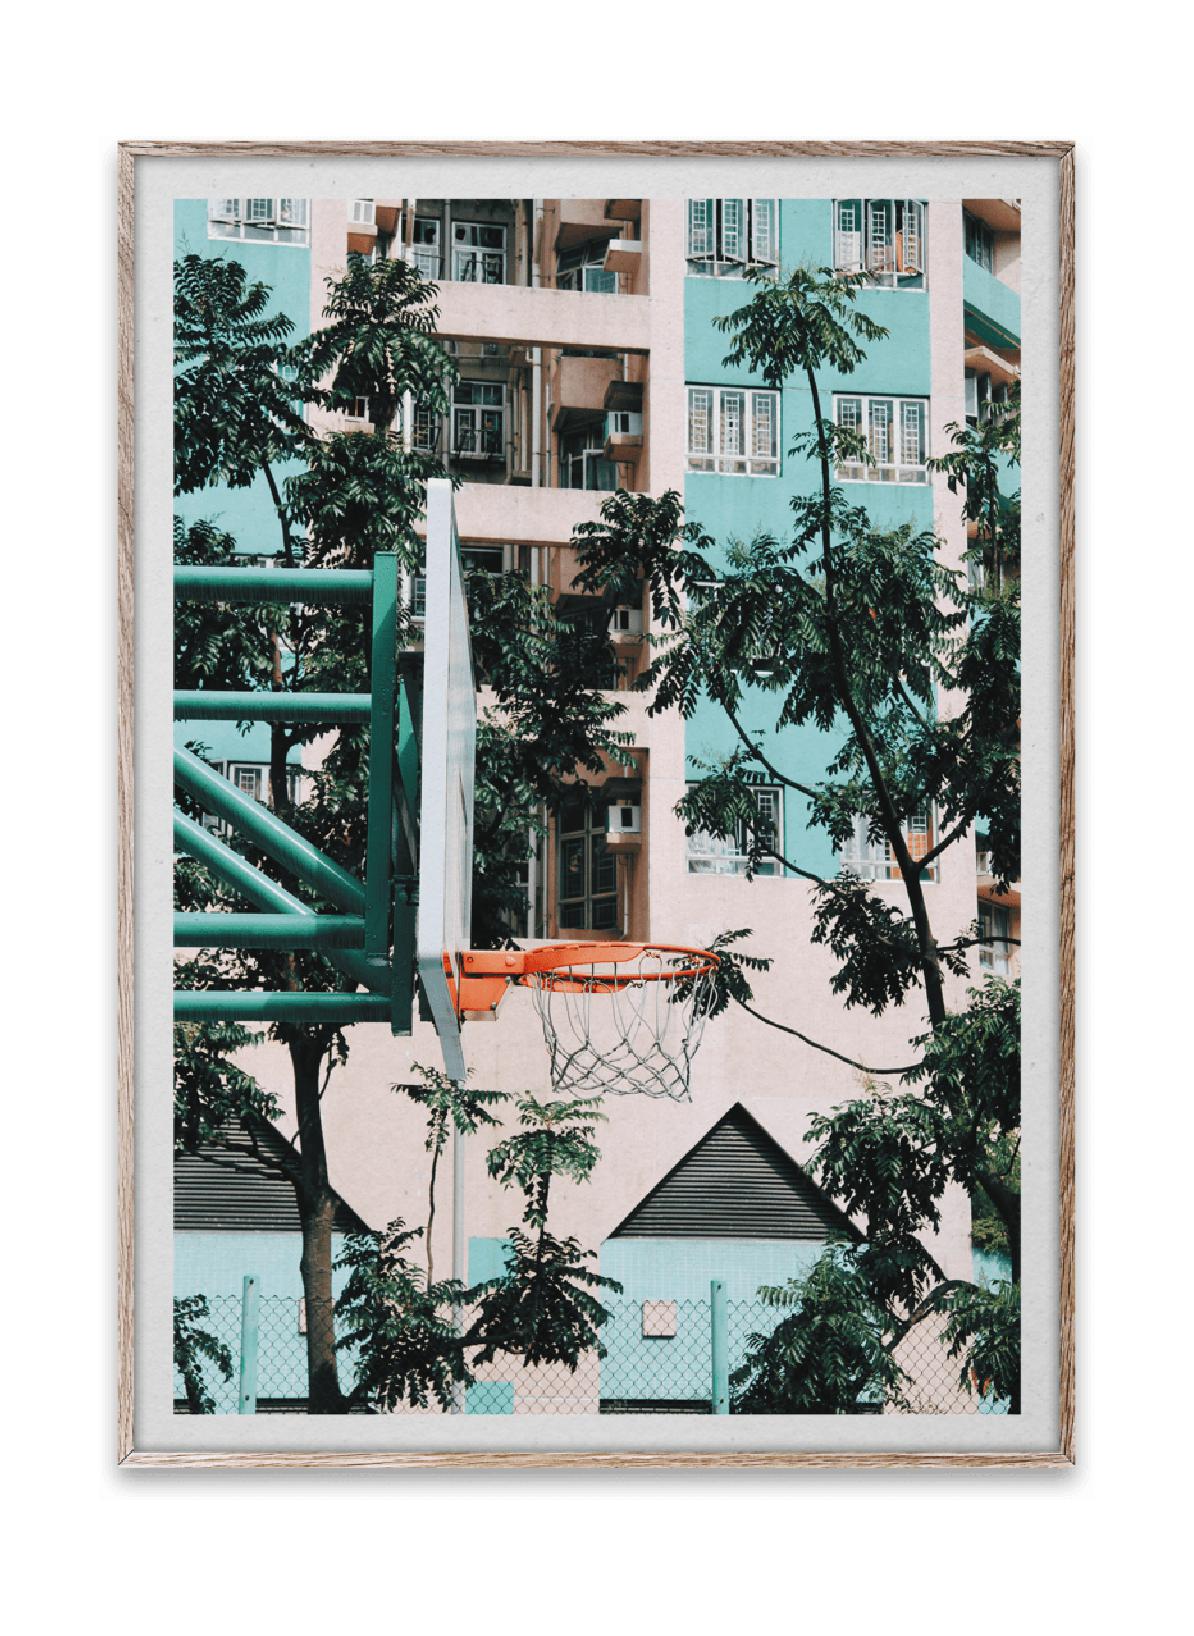 Paper Collective Cities of Basketball 01, Hong Kong Affiche, 30x40 cm